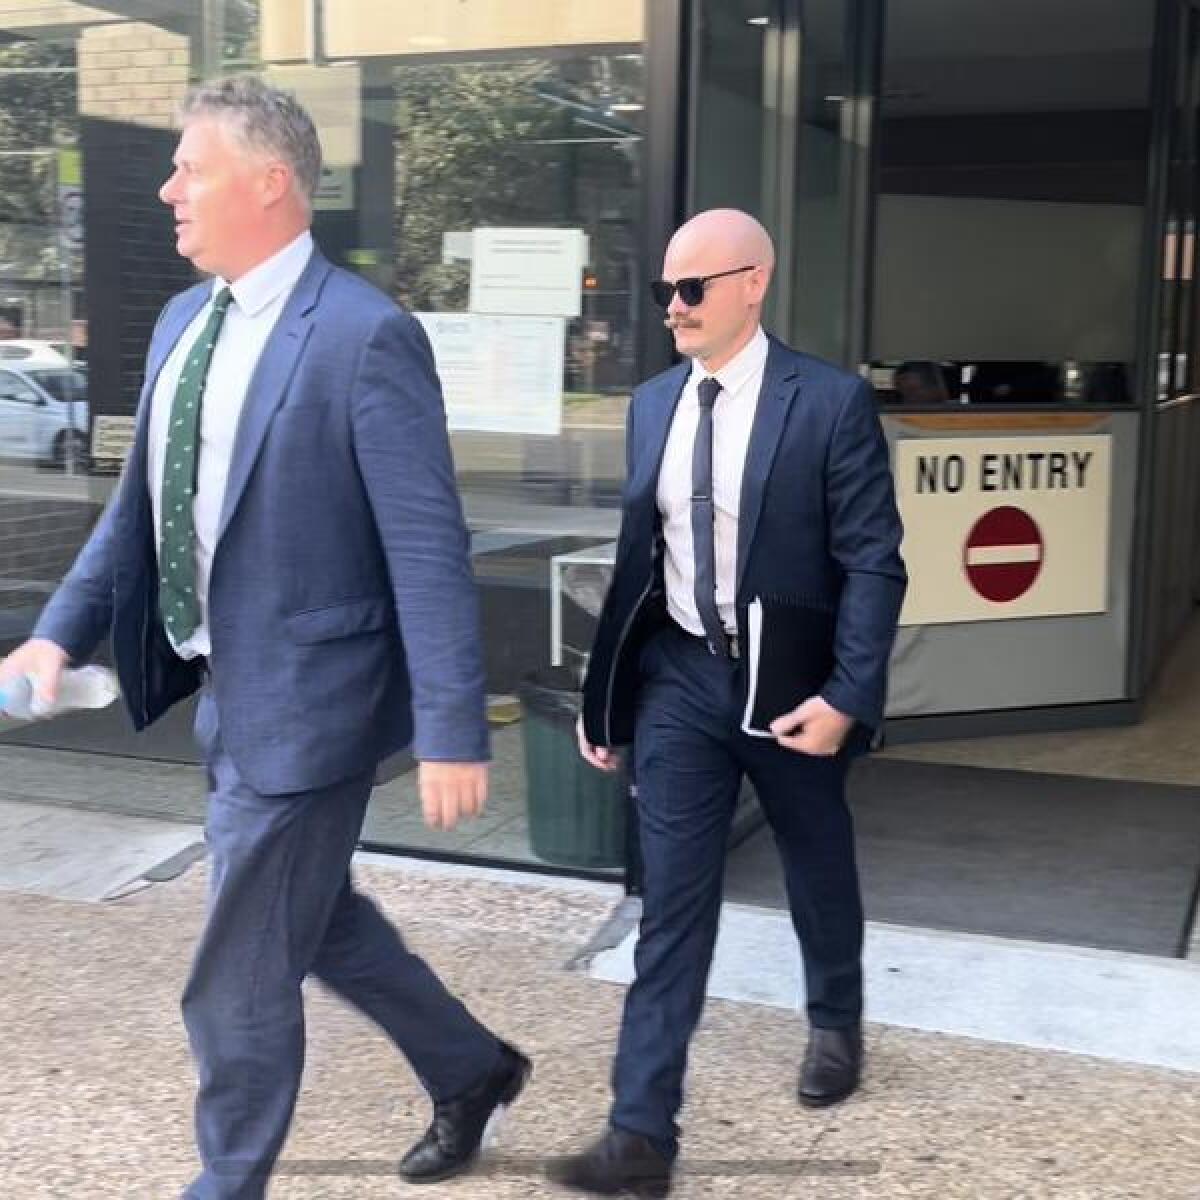 Alexander James Cox (right) leaves court with lawyer Paul McGirr.